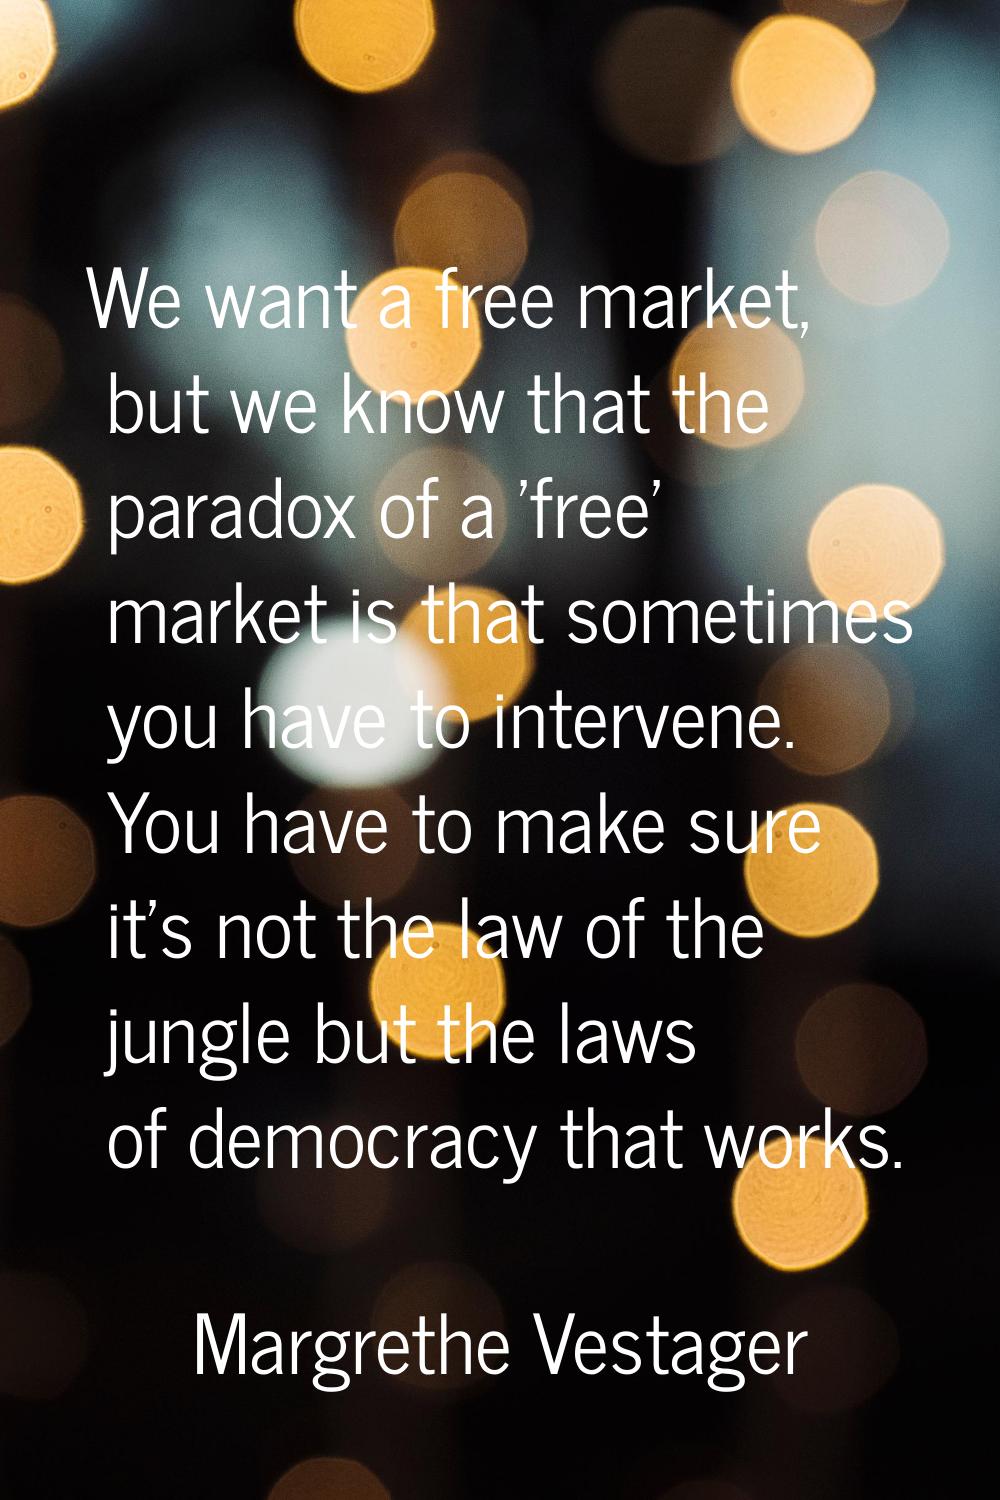 We want a free market, but we know that the paradox of a 'free' market is that sometimes you have t